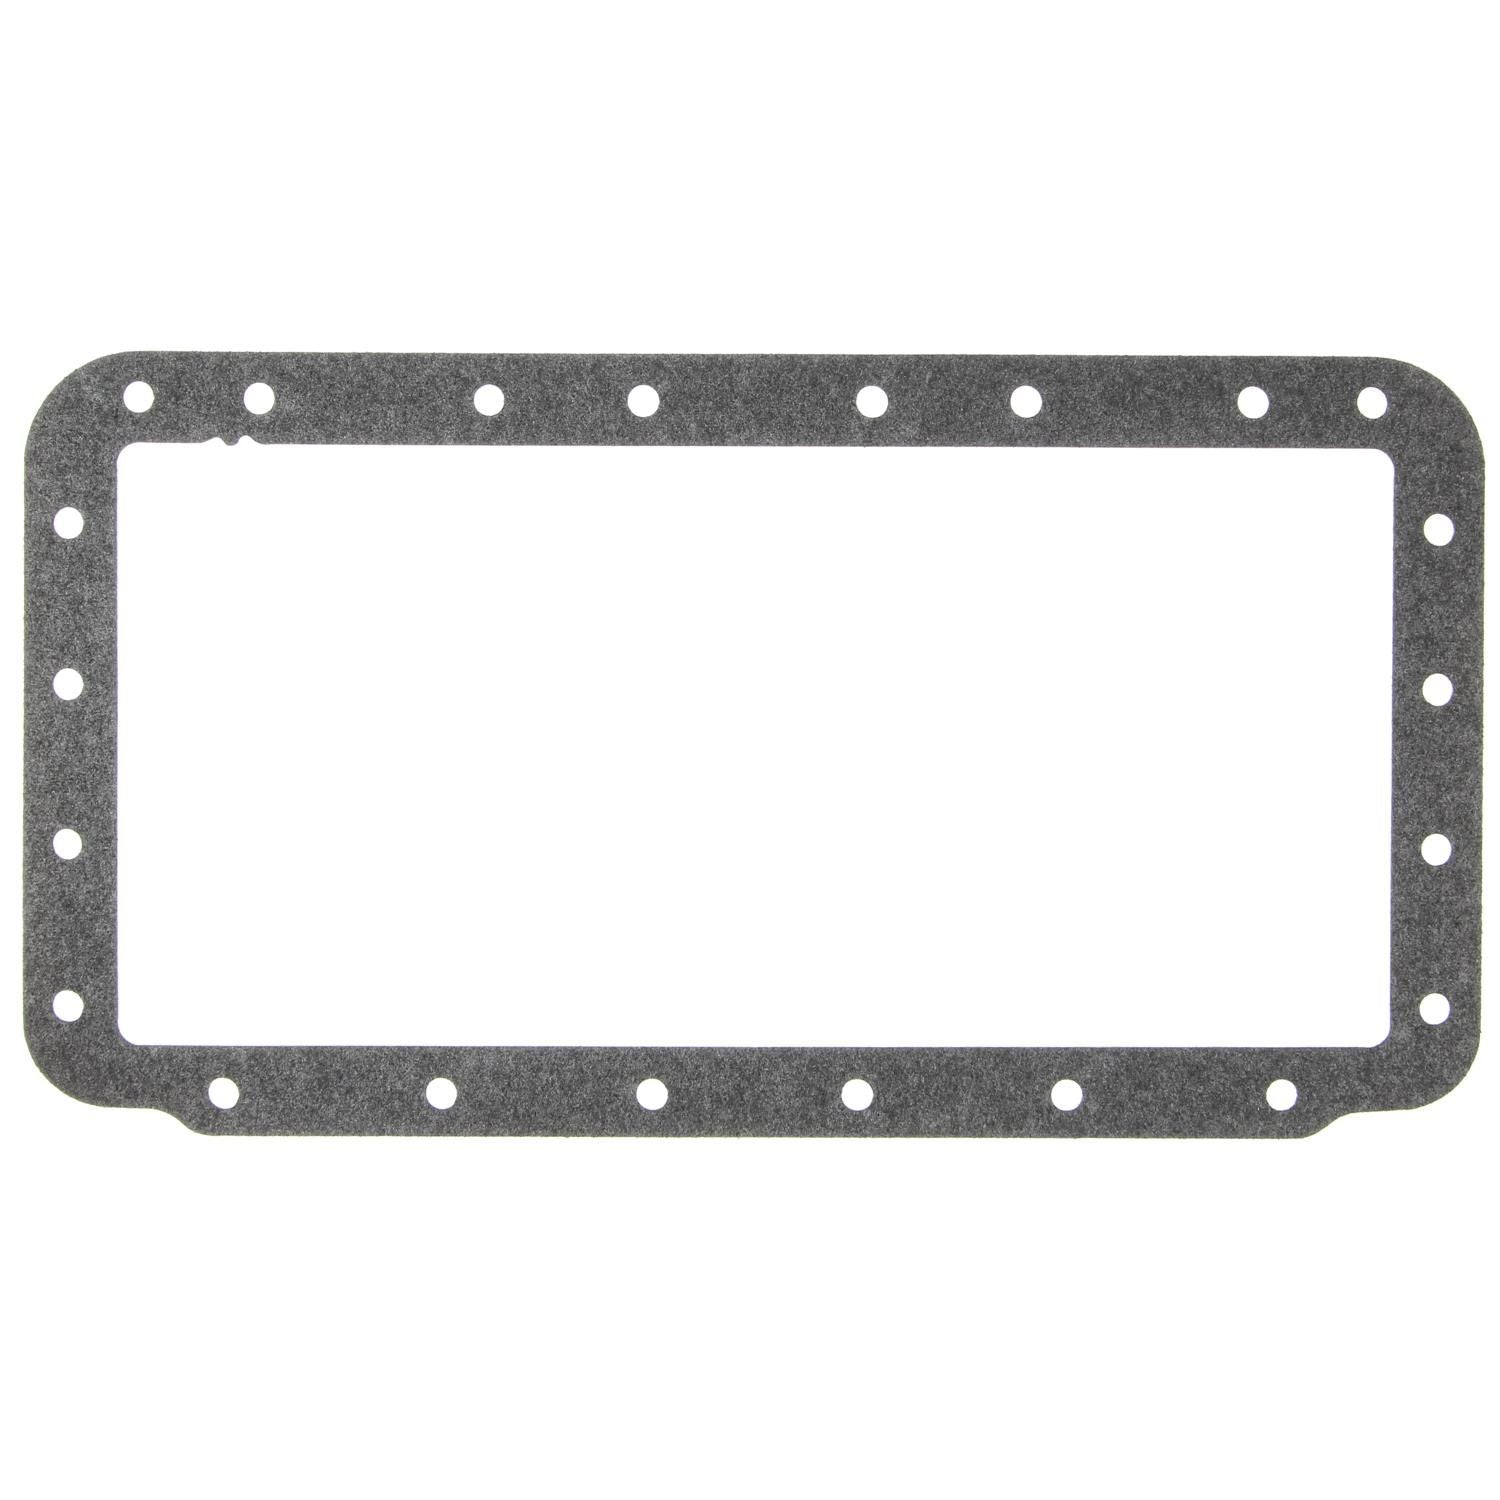 MAHLE Automatic Transmission Oil Pan Gasket W33183